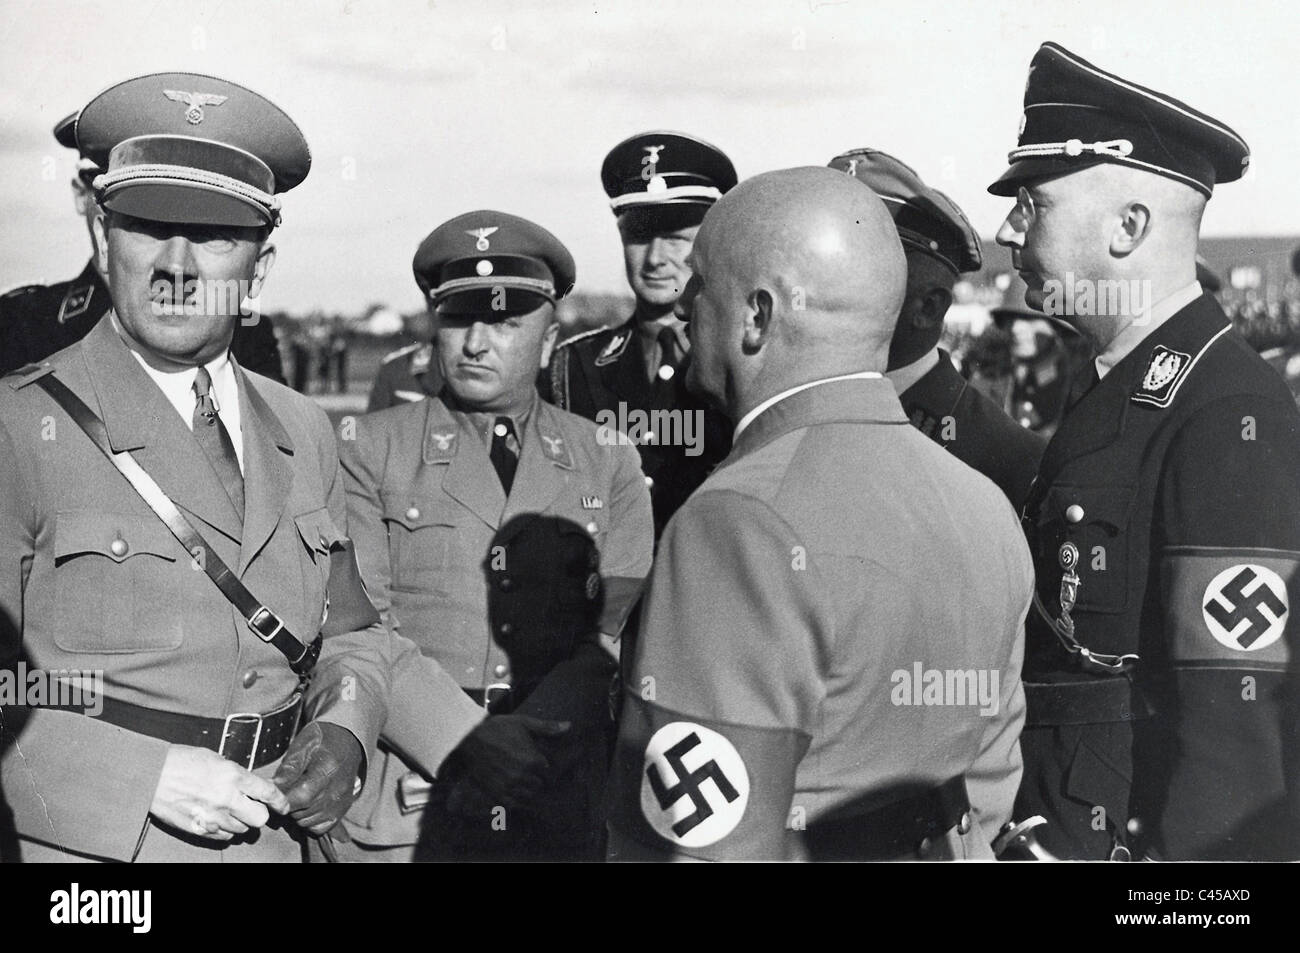 Hitler with party members in Nuremberg, 1938 Stock Photo